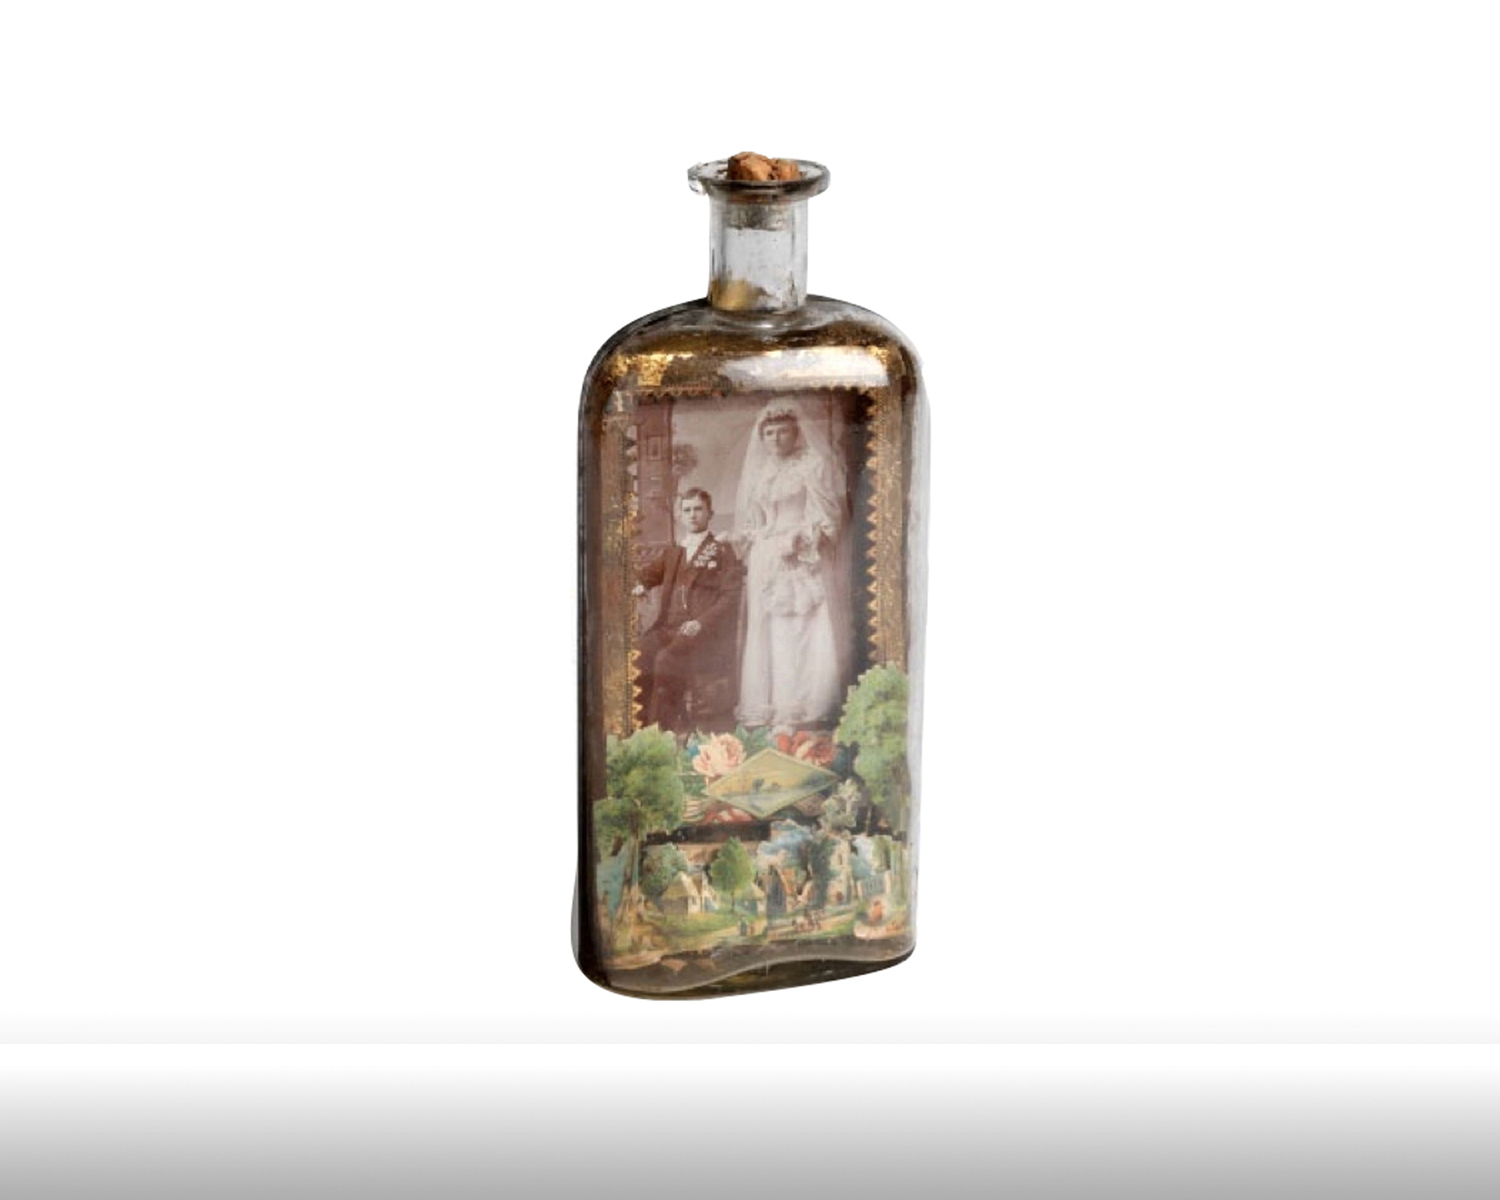    Whiskey bottle with portrait of newlyweds set against a die cut pastoral background. 1880s   